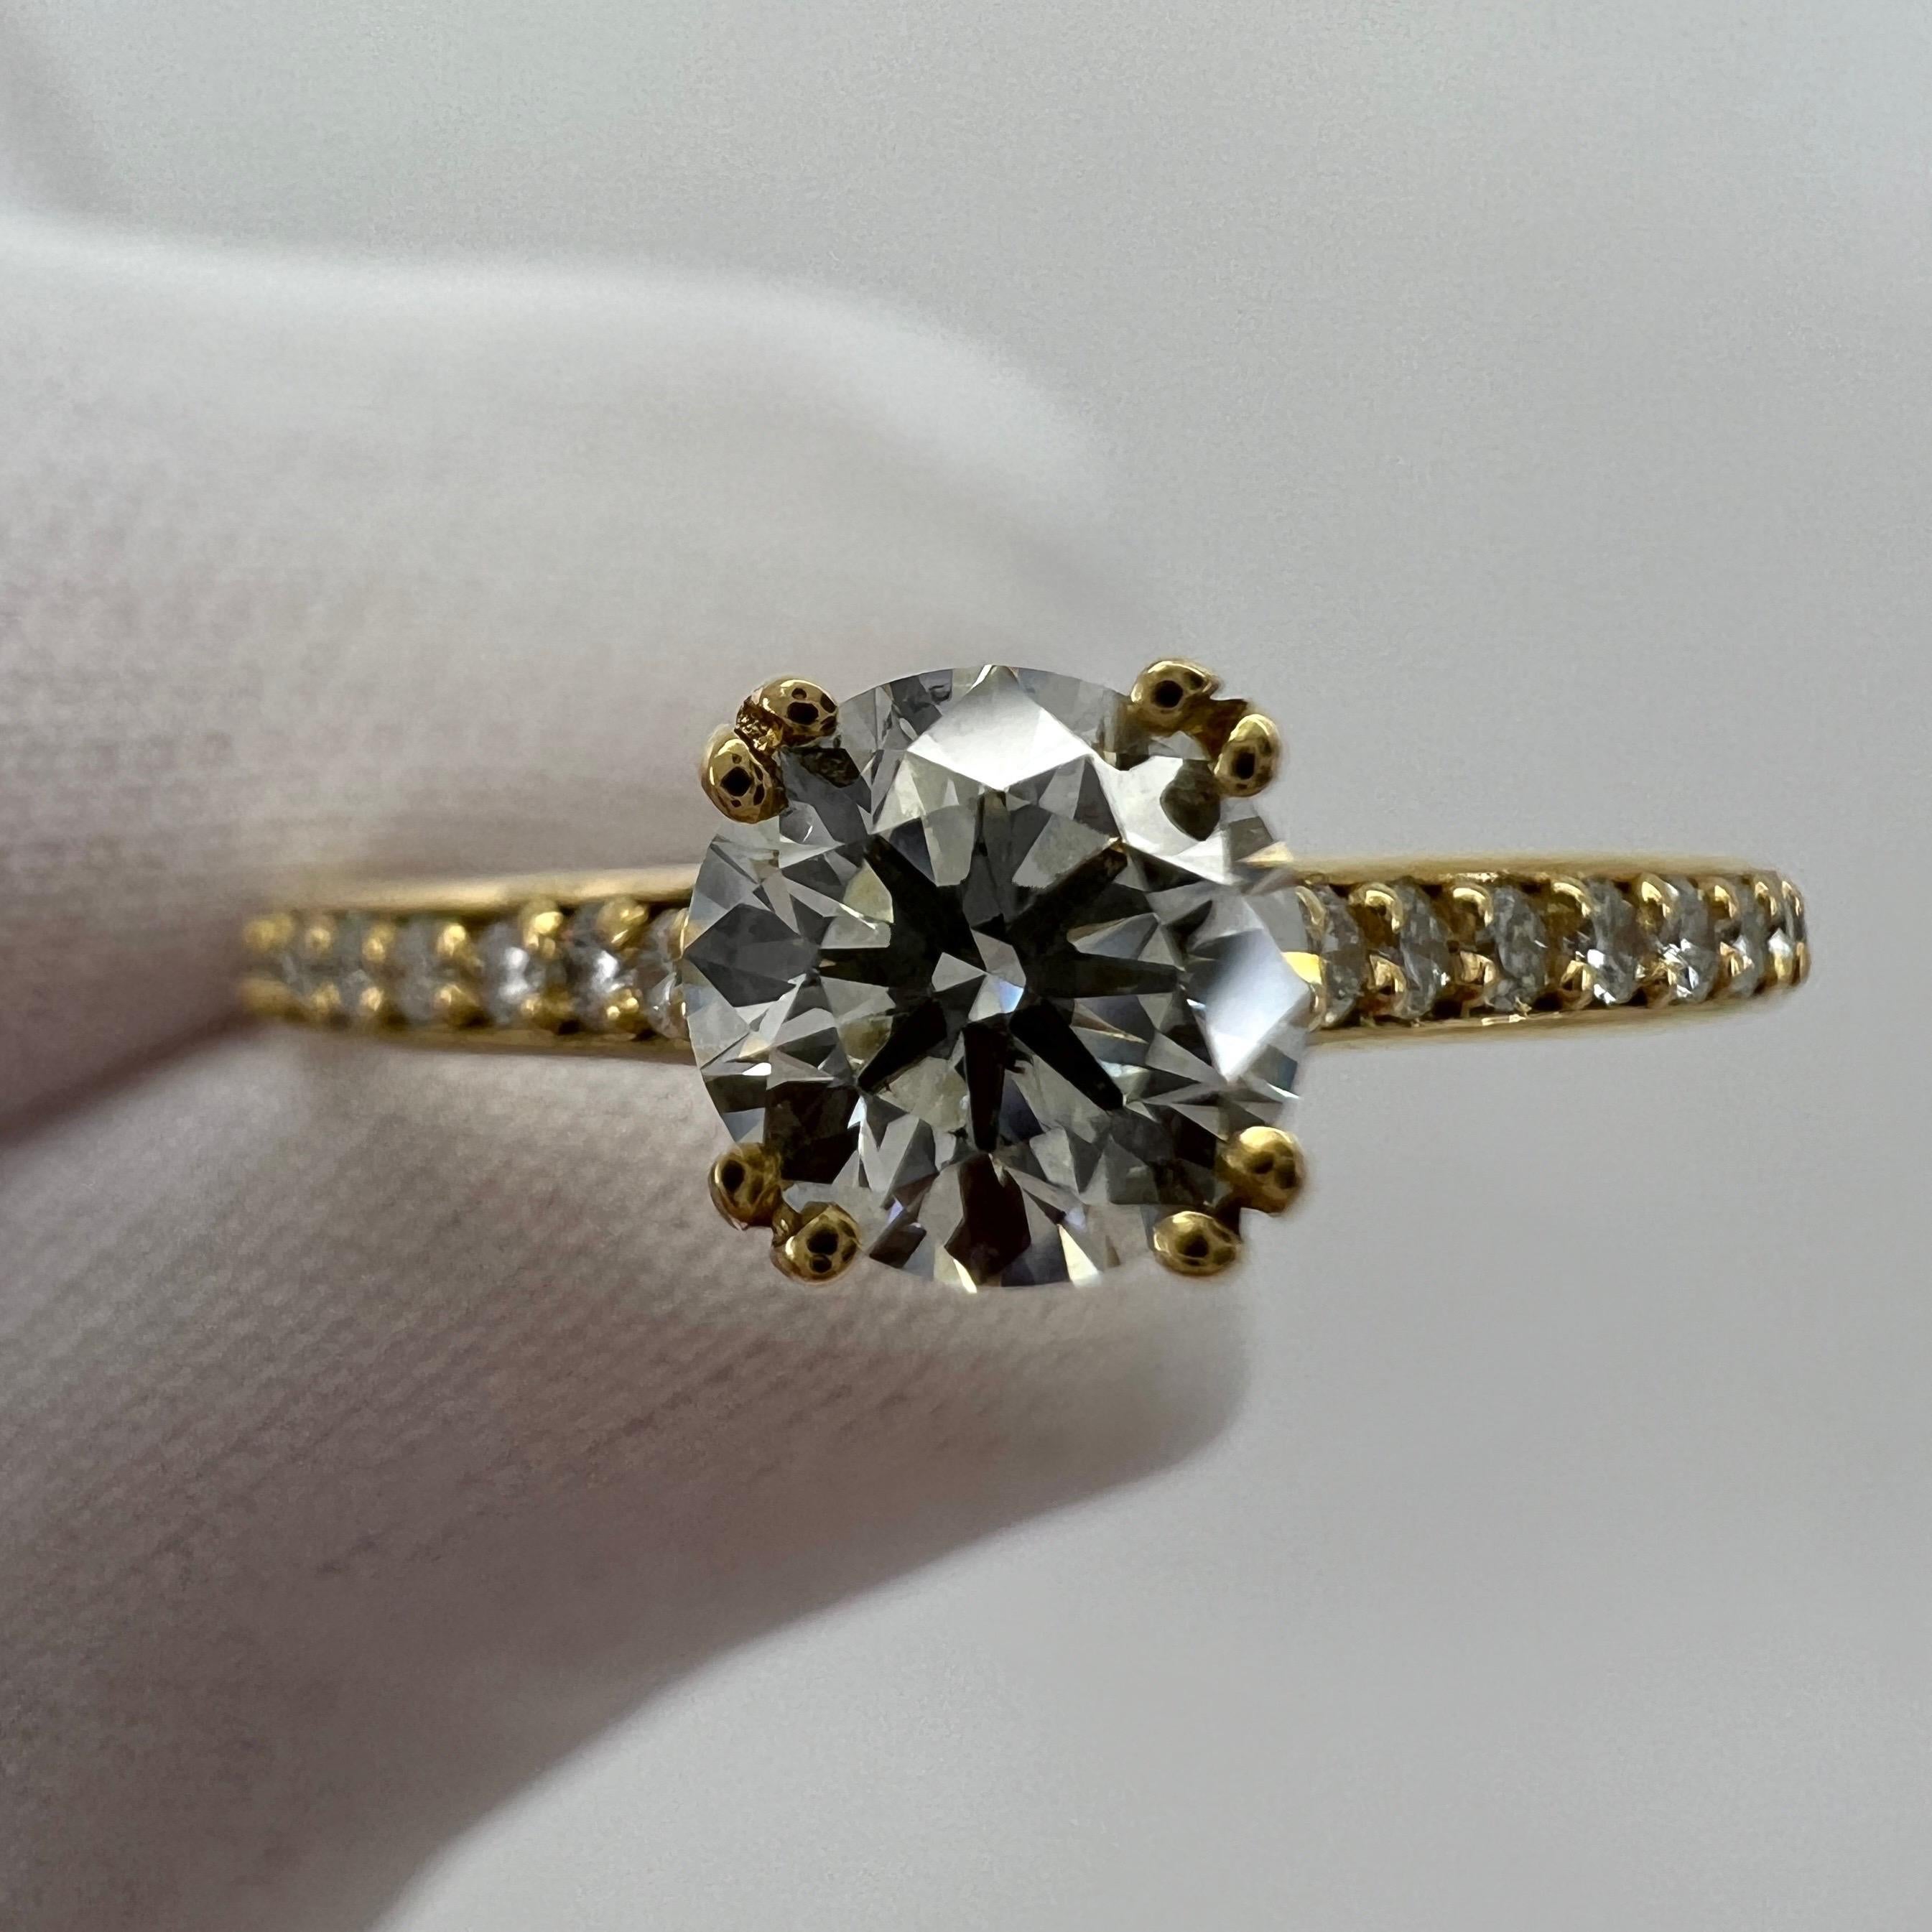 Fine Natural Round Brilliant Cut White Diamond 18k Yellow Gold Ring With Diamond Accents.

Fine 5.1mm natural diamond centre with SI1 clarity,  G/H colour and an excellent round brilliant cut. 0.53 Carat. Very sparkly gem with top proportions and